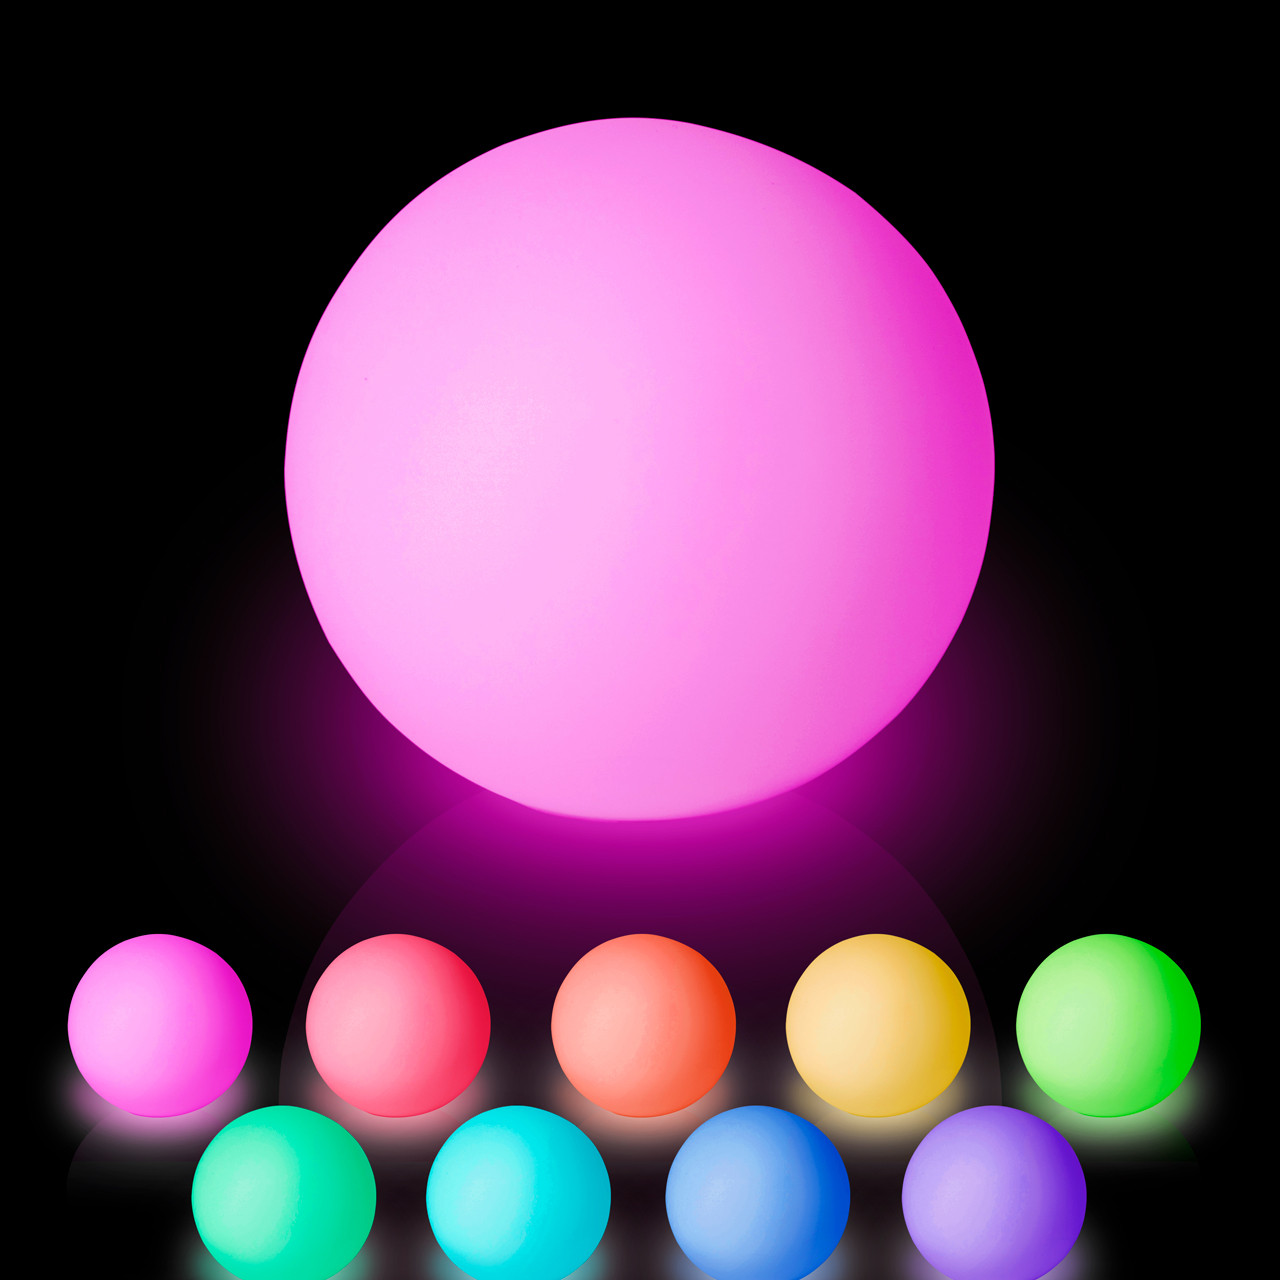 Floating Spheres Of Light Wallpapers